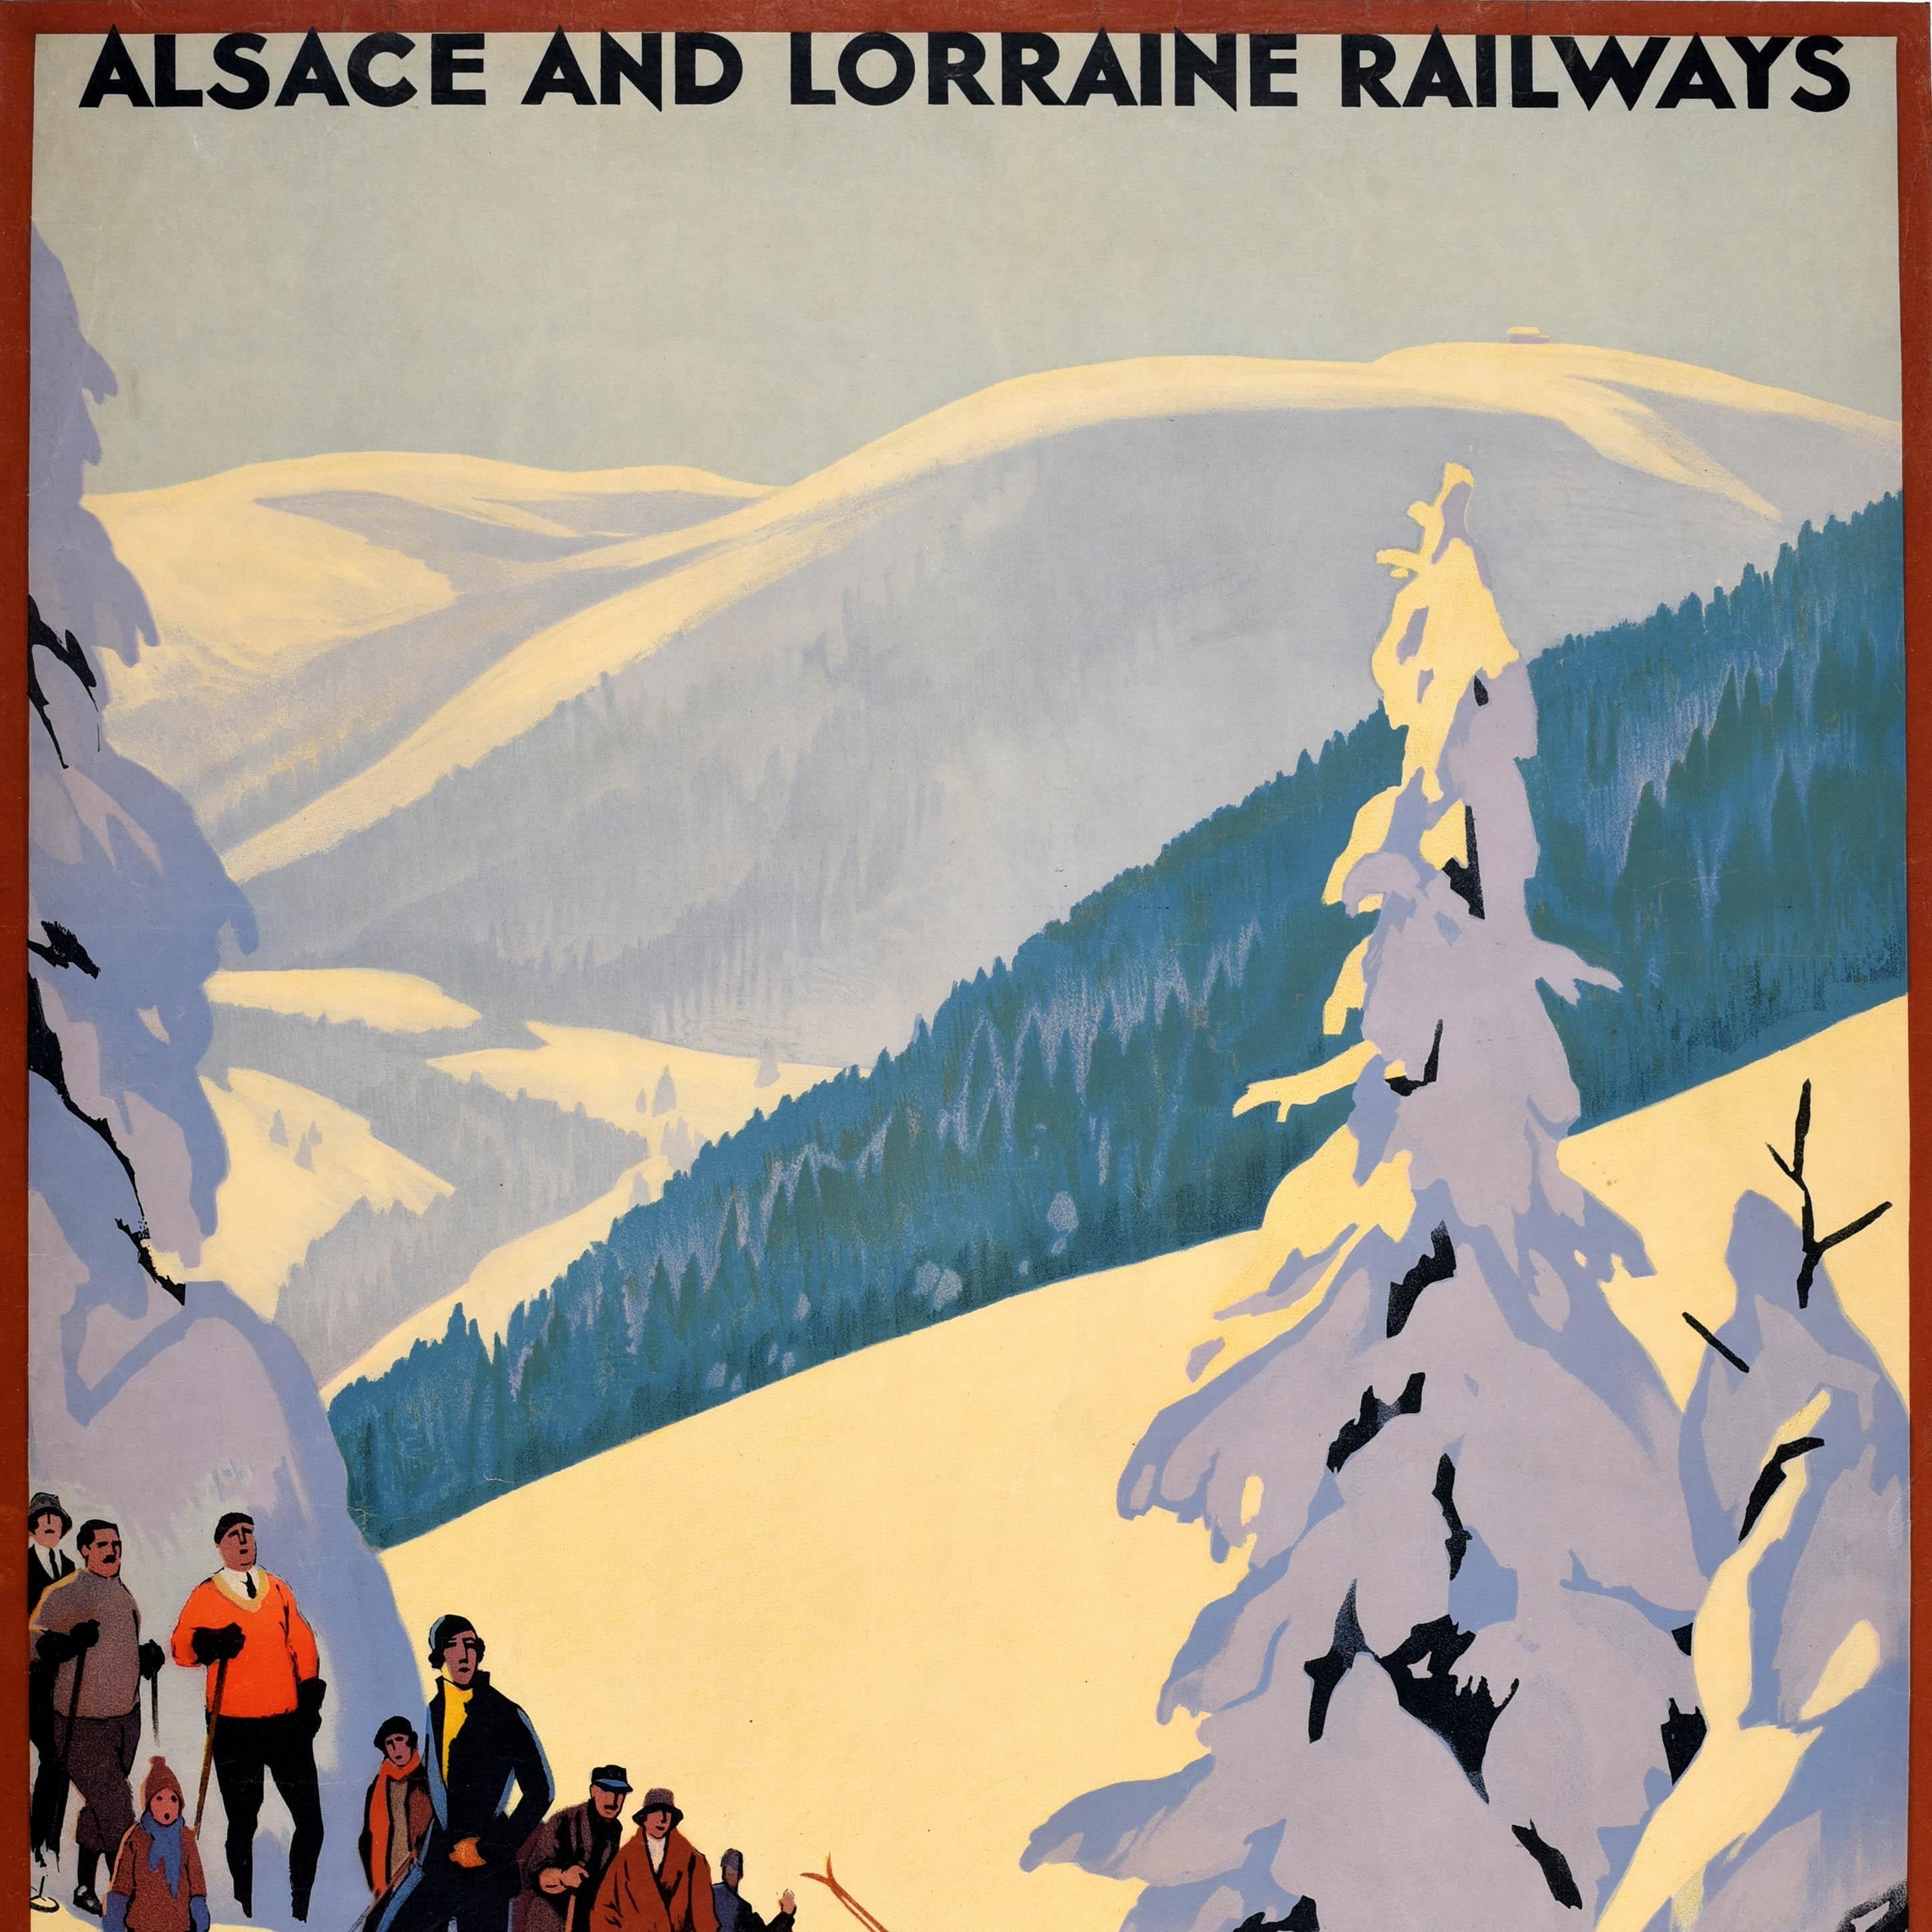 Original vintage ski travel poster - Alsace and Lorraine Railways Winter Sports in the Vosges The Munster Walley and The Hohneck - featuring a stunning Art Deco design by the notable French artist Roger Broders (1883-1953) of a man skiing past snow